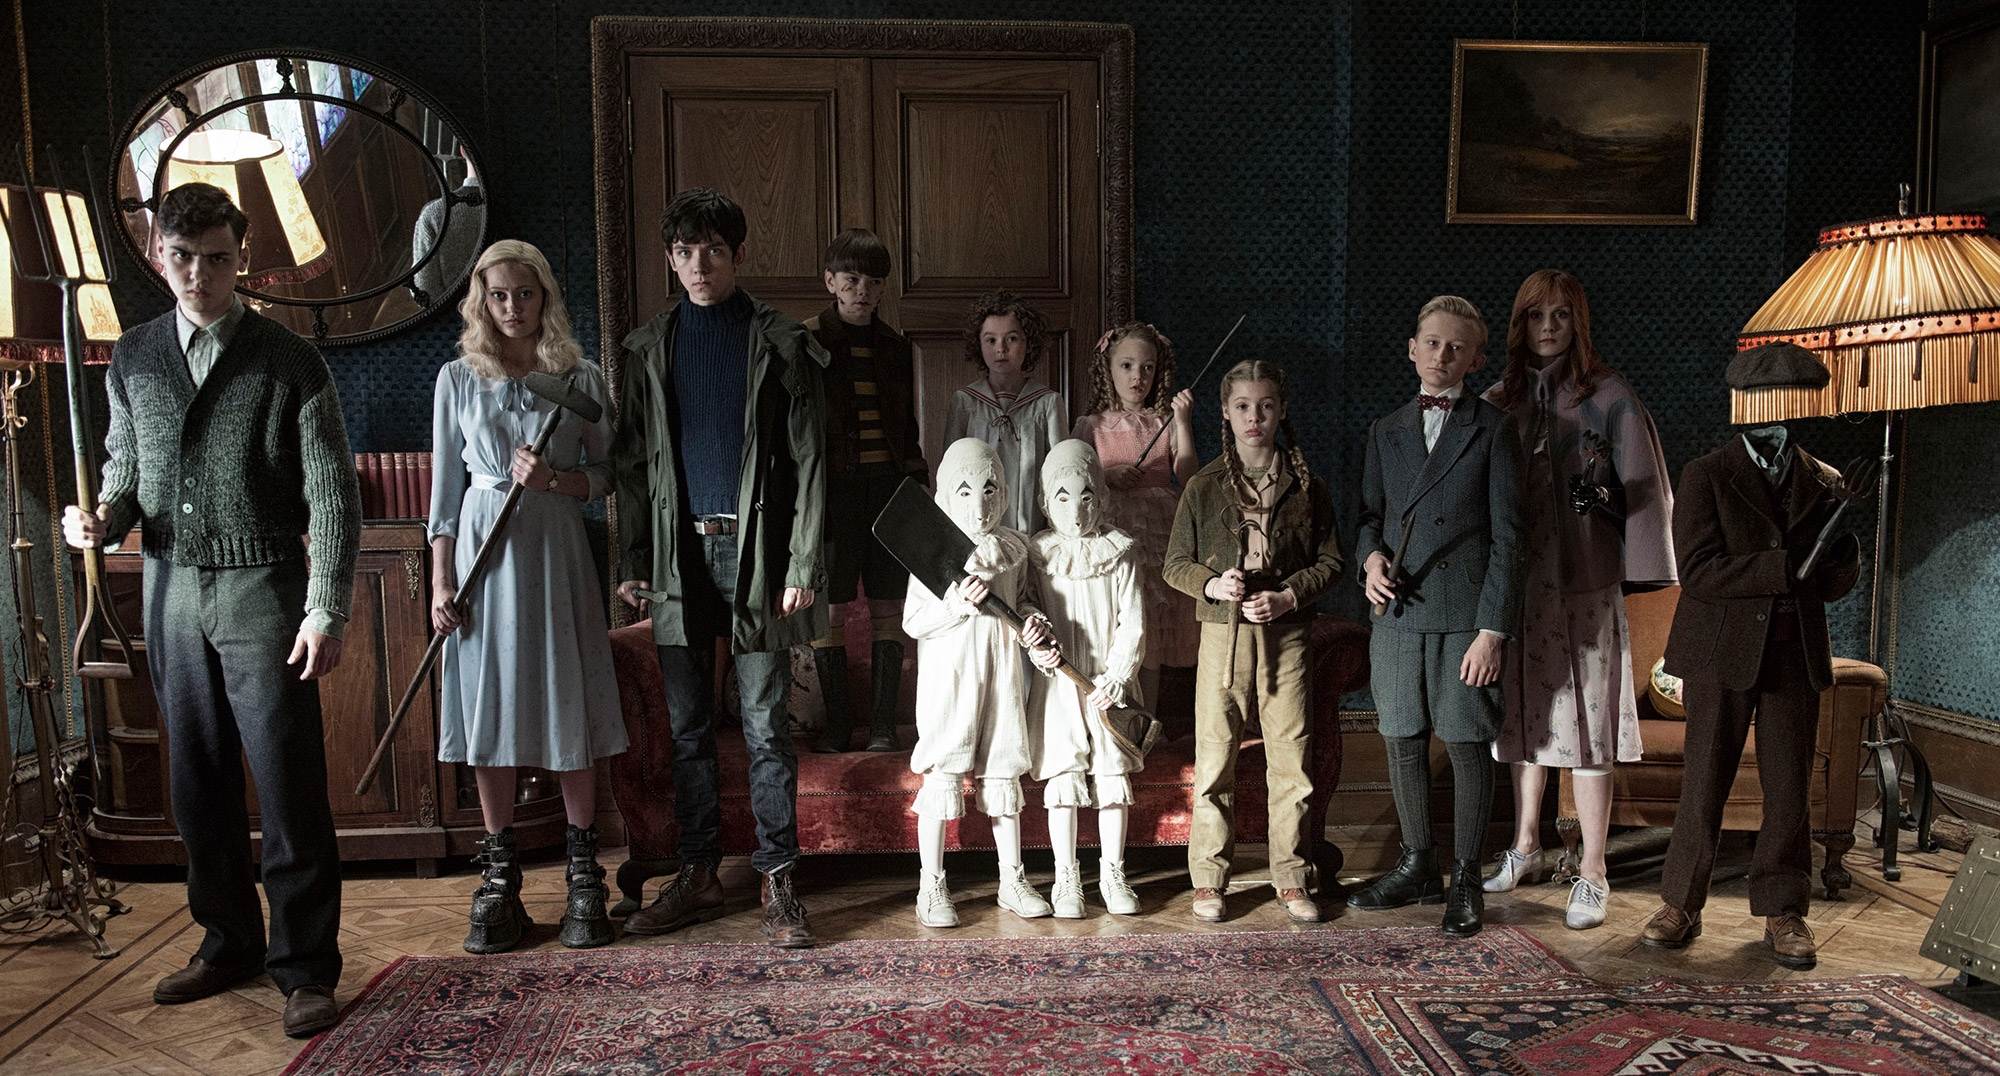 HQ Miss Peregrine's Home For Peculiar Children Wallpapers | File 1597.2Kb